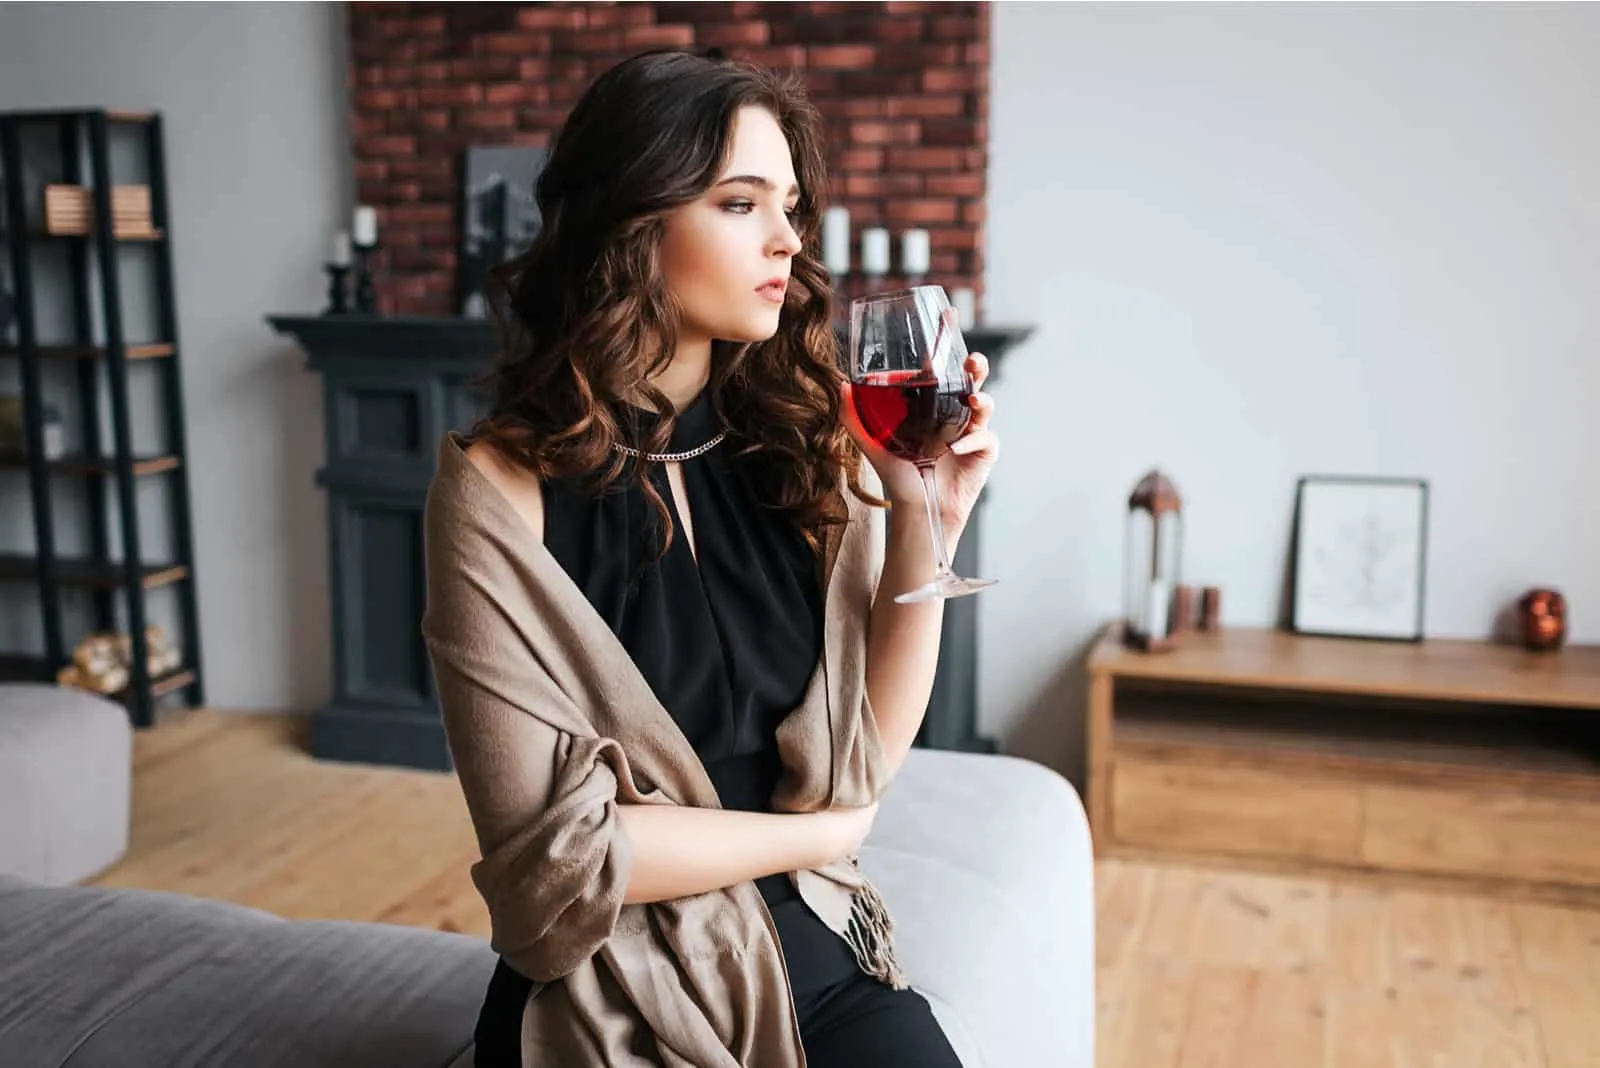 a woman with long black hair leaning against the couch drinks wine